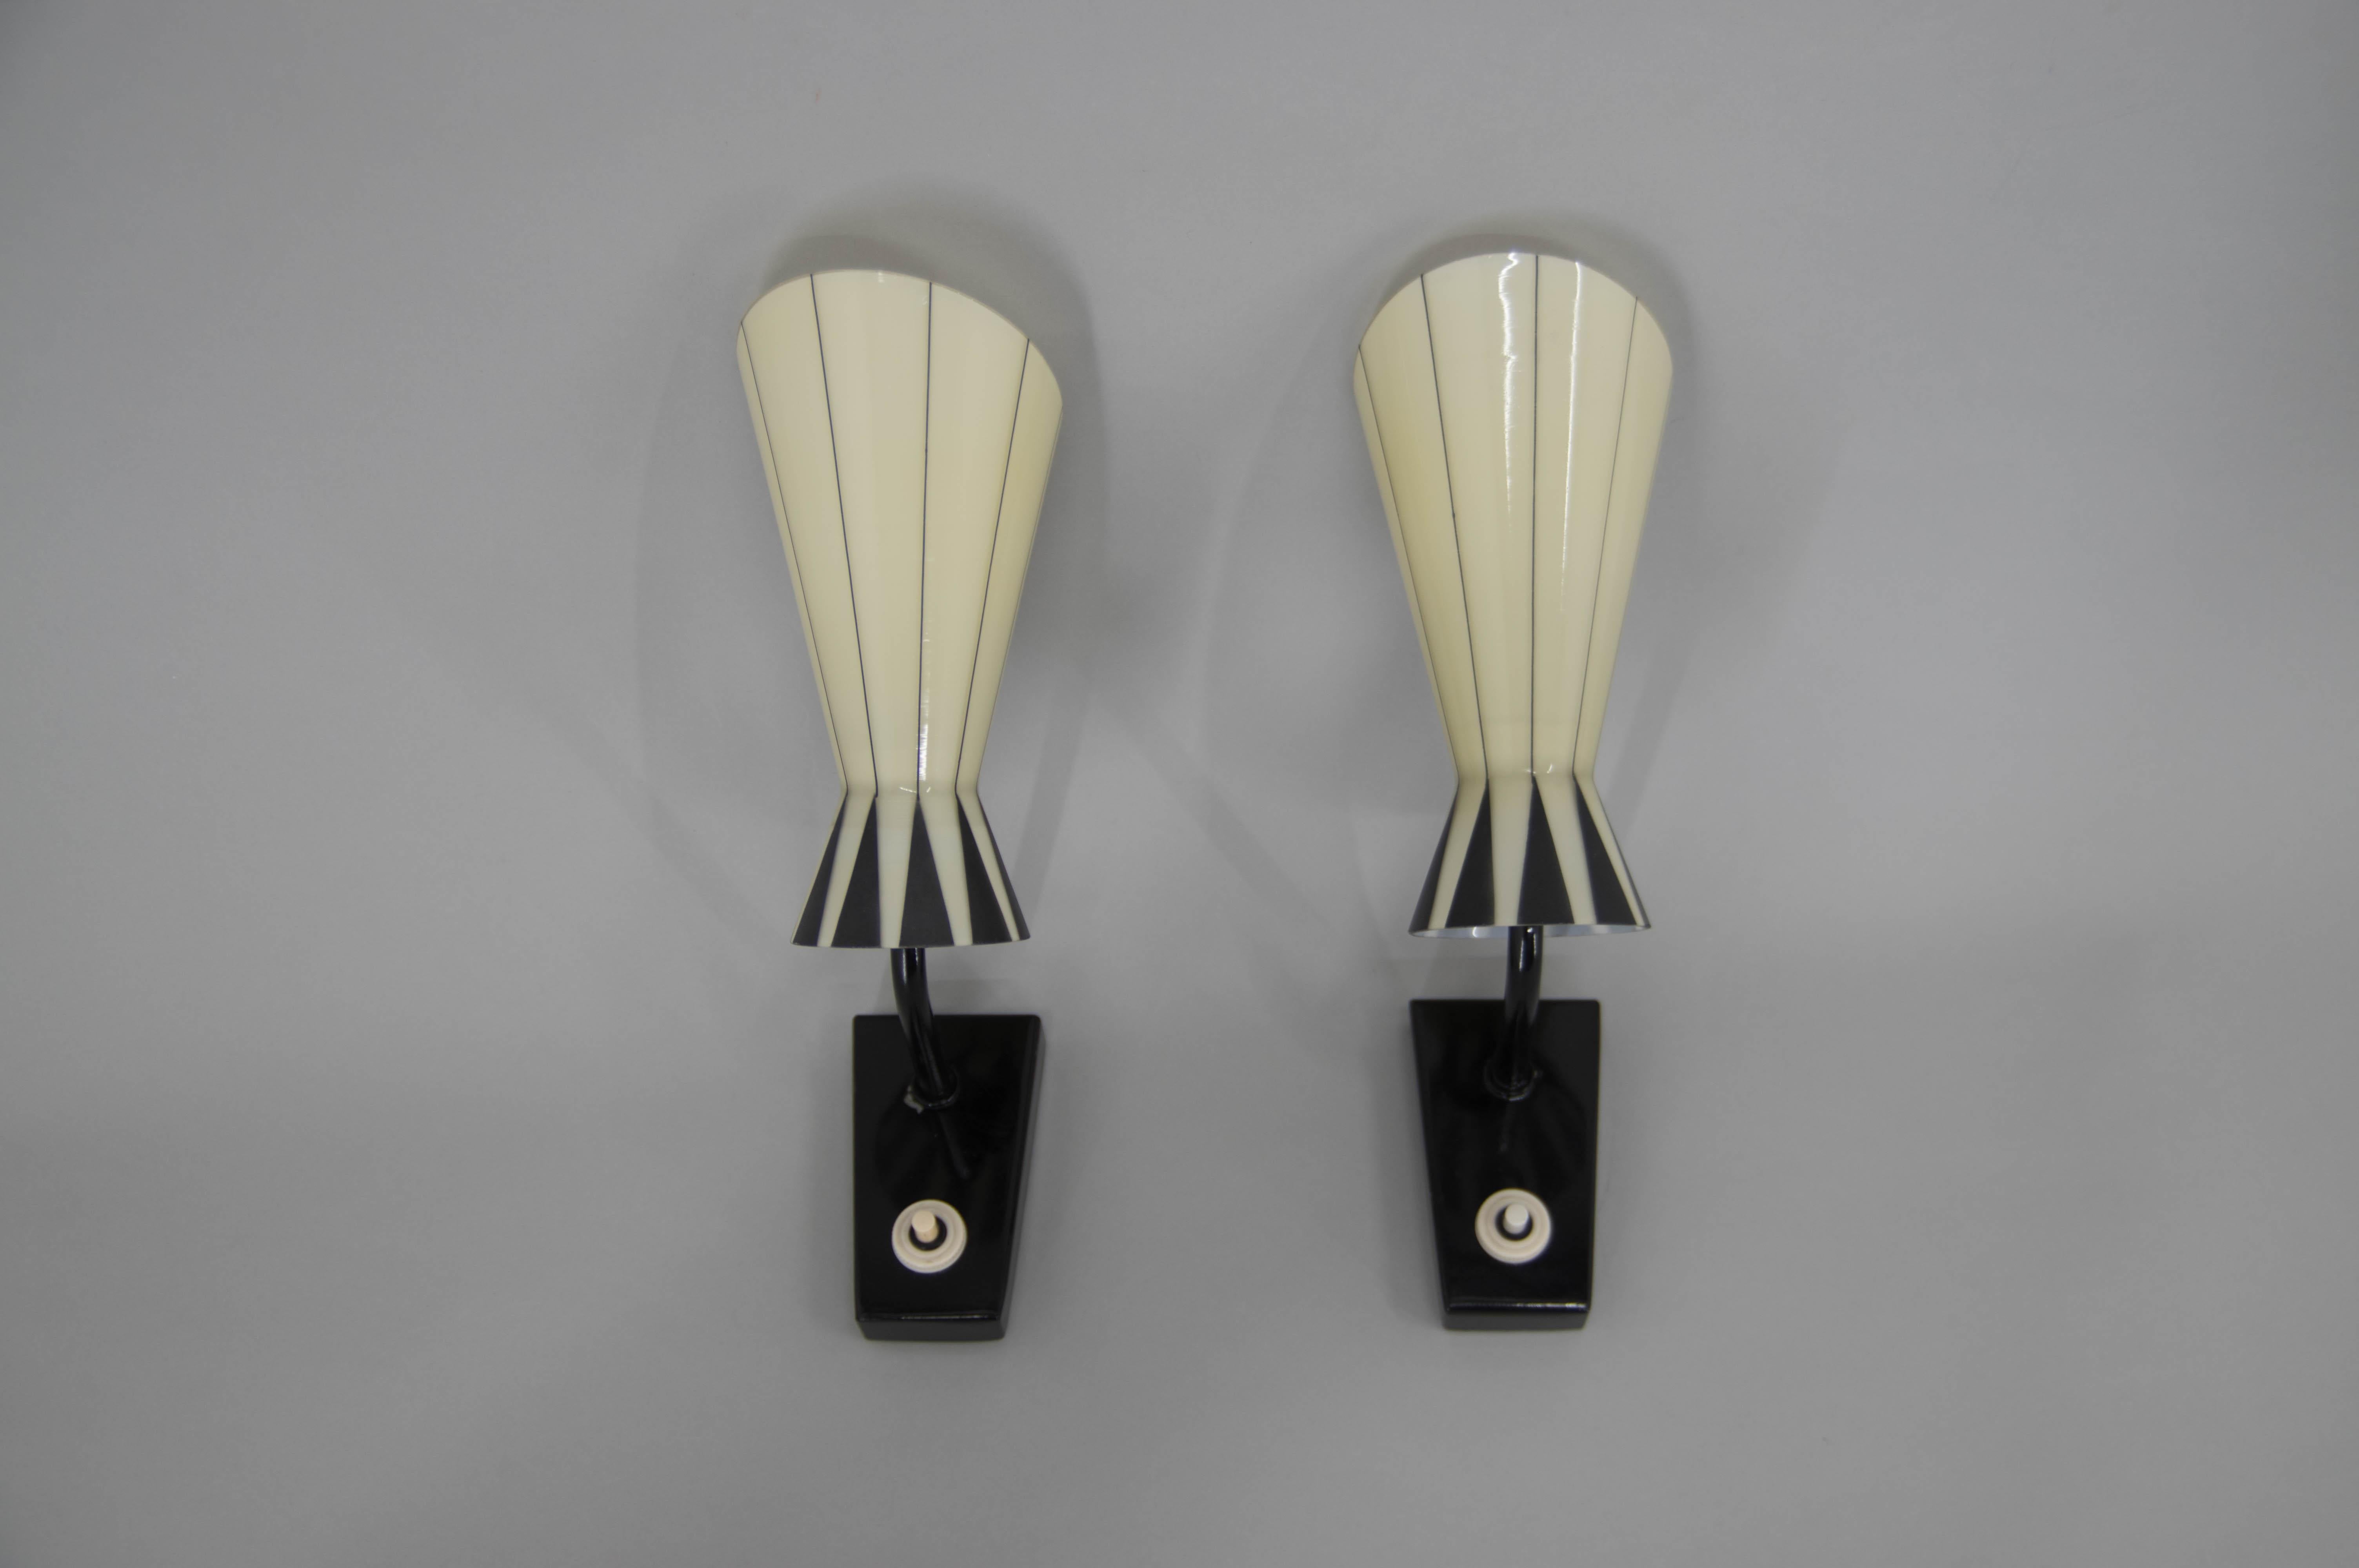 Metal Art Deco Wall Lamps, Europe, 1960s For Sale